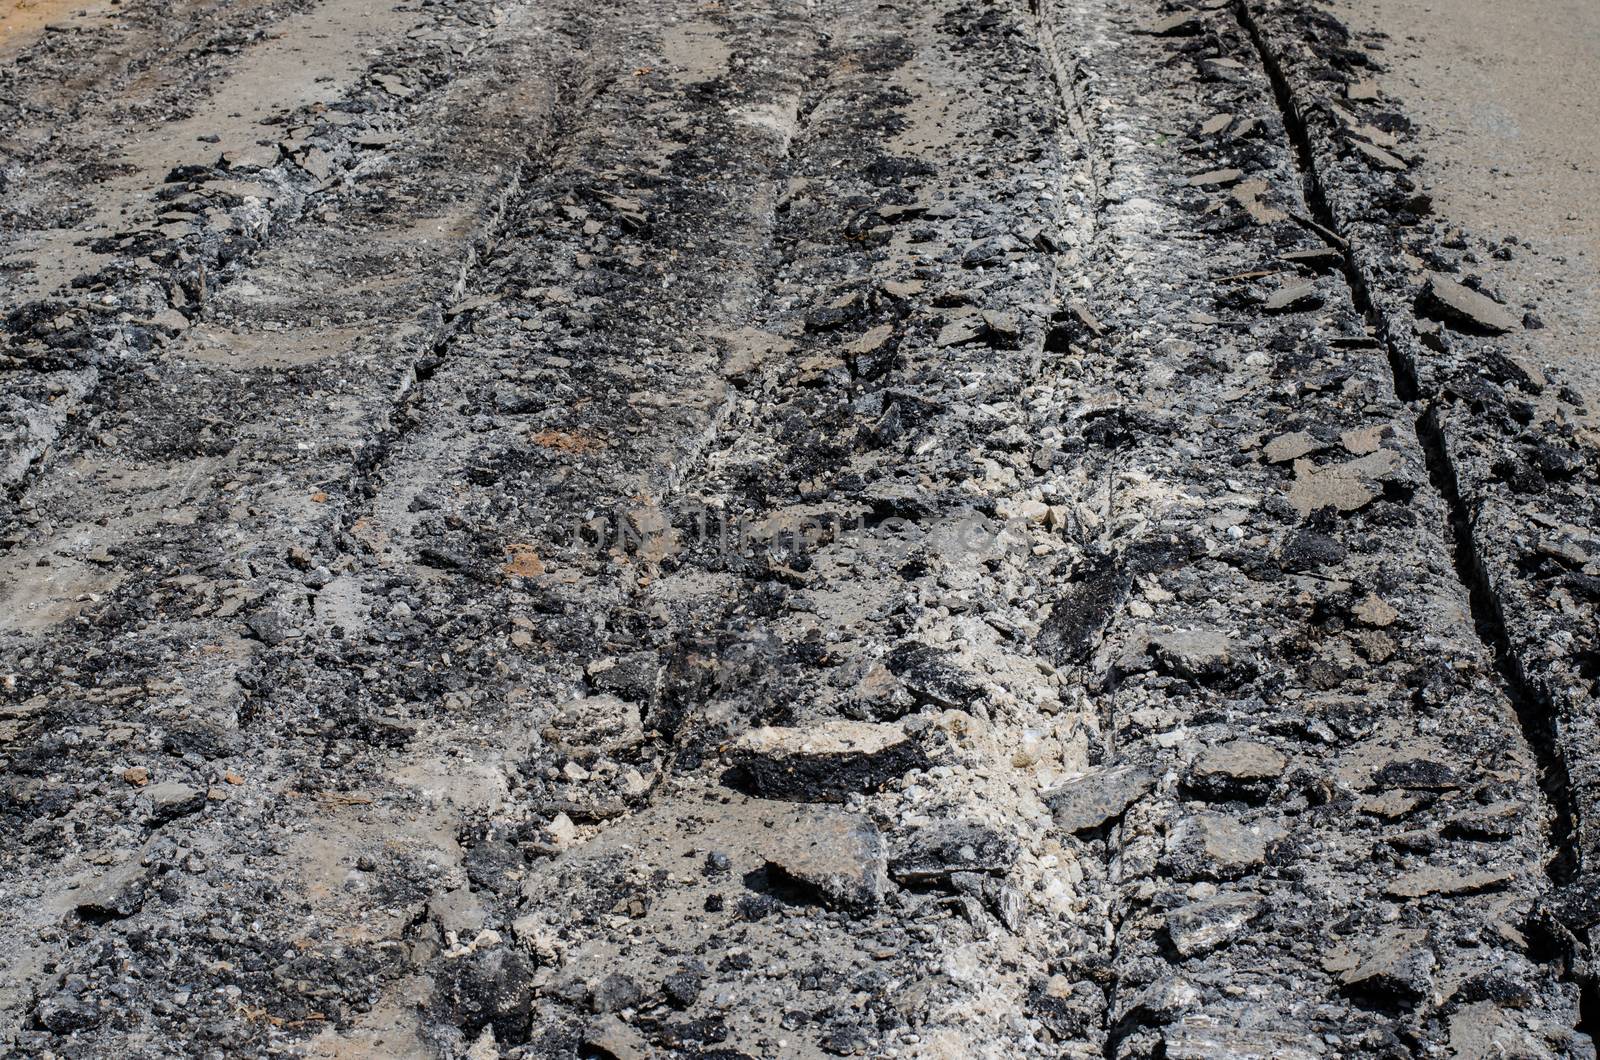 Road damage, with holes